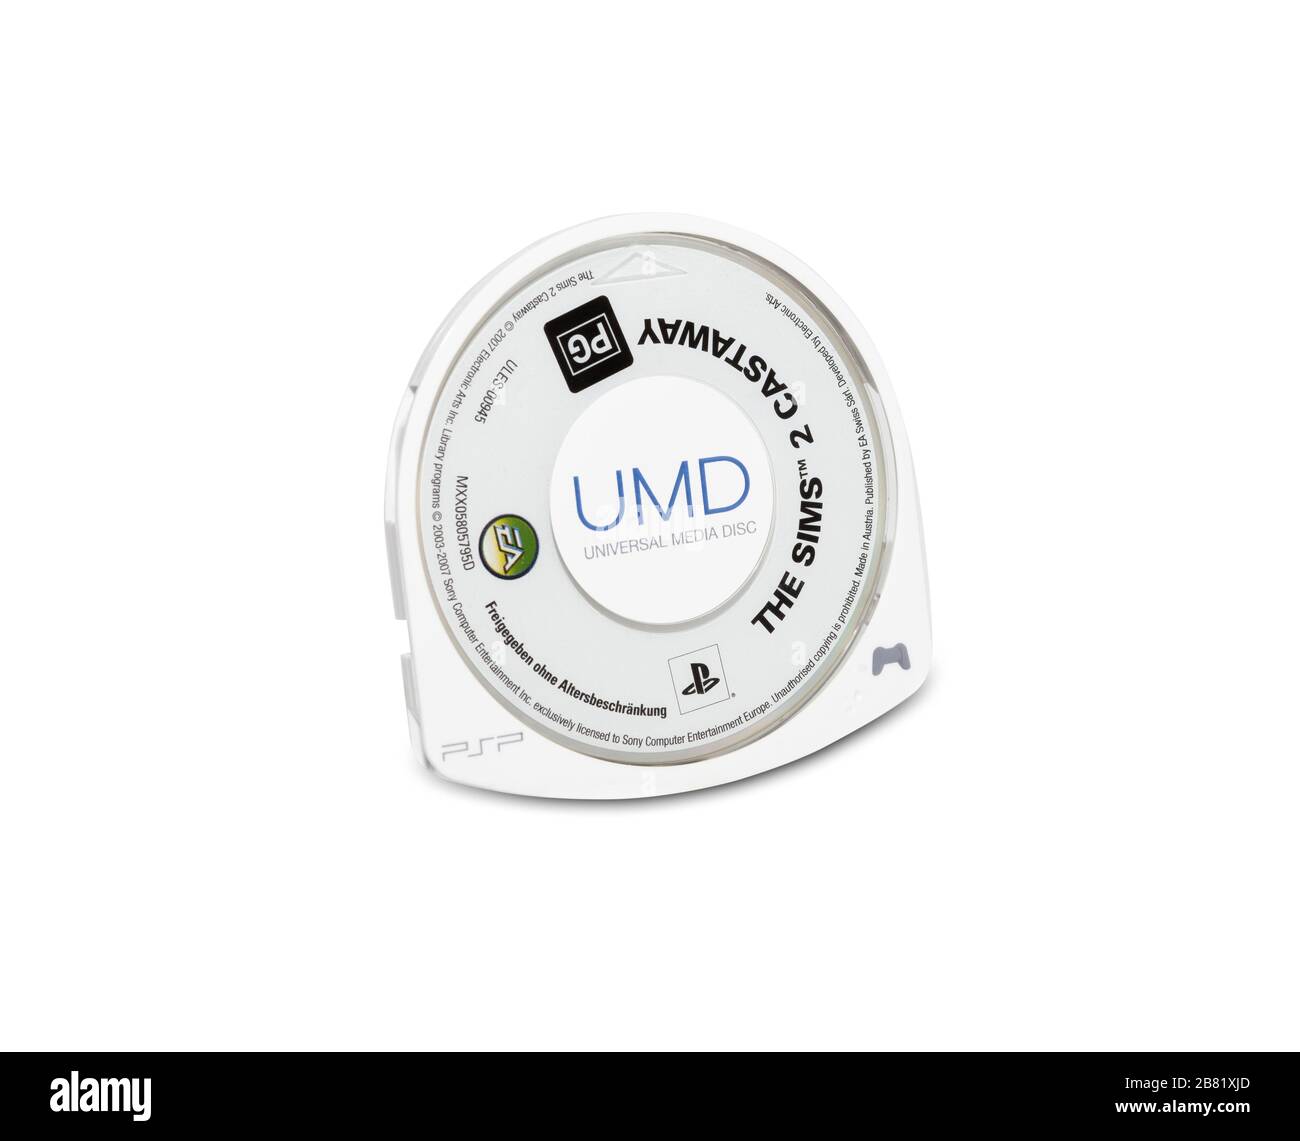 Italy - march 14, 2020: Sony UMD disk for Playstation Portable born in the early 2000s on white Stock Photo